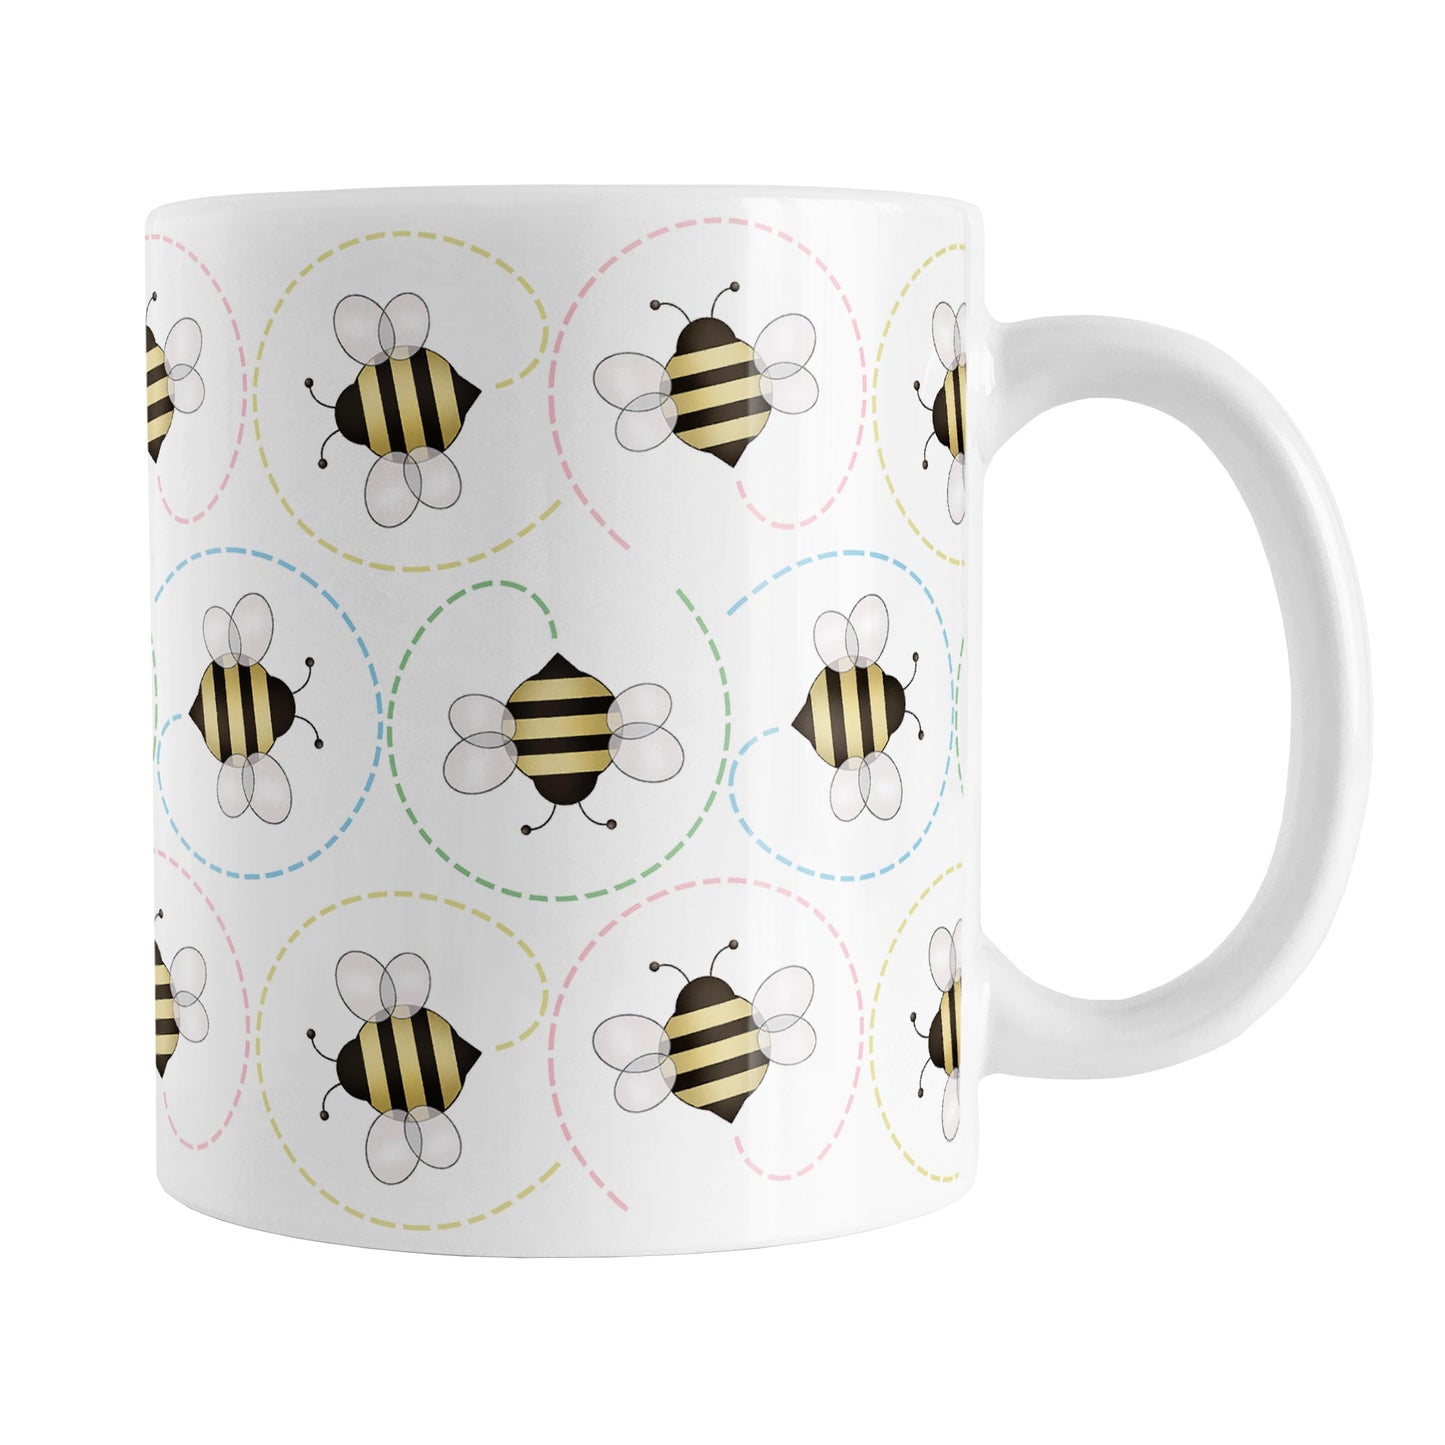 Circling Dainty Bee Pattern Mug (11oz) at Amy's Coffee Mugs. A ceramic bee mug with adorable dainty black and yellow bees in a pattern around the mug with colorful dotted line circling flight paths. A minimalist bee design for bee lovers who also love color and happy designs.